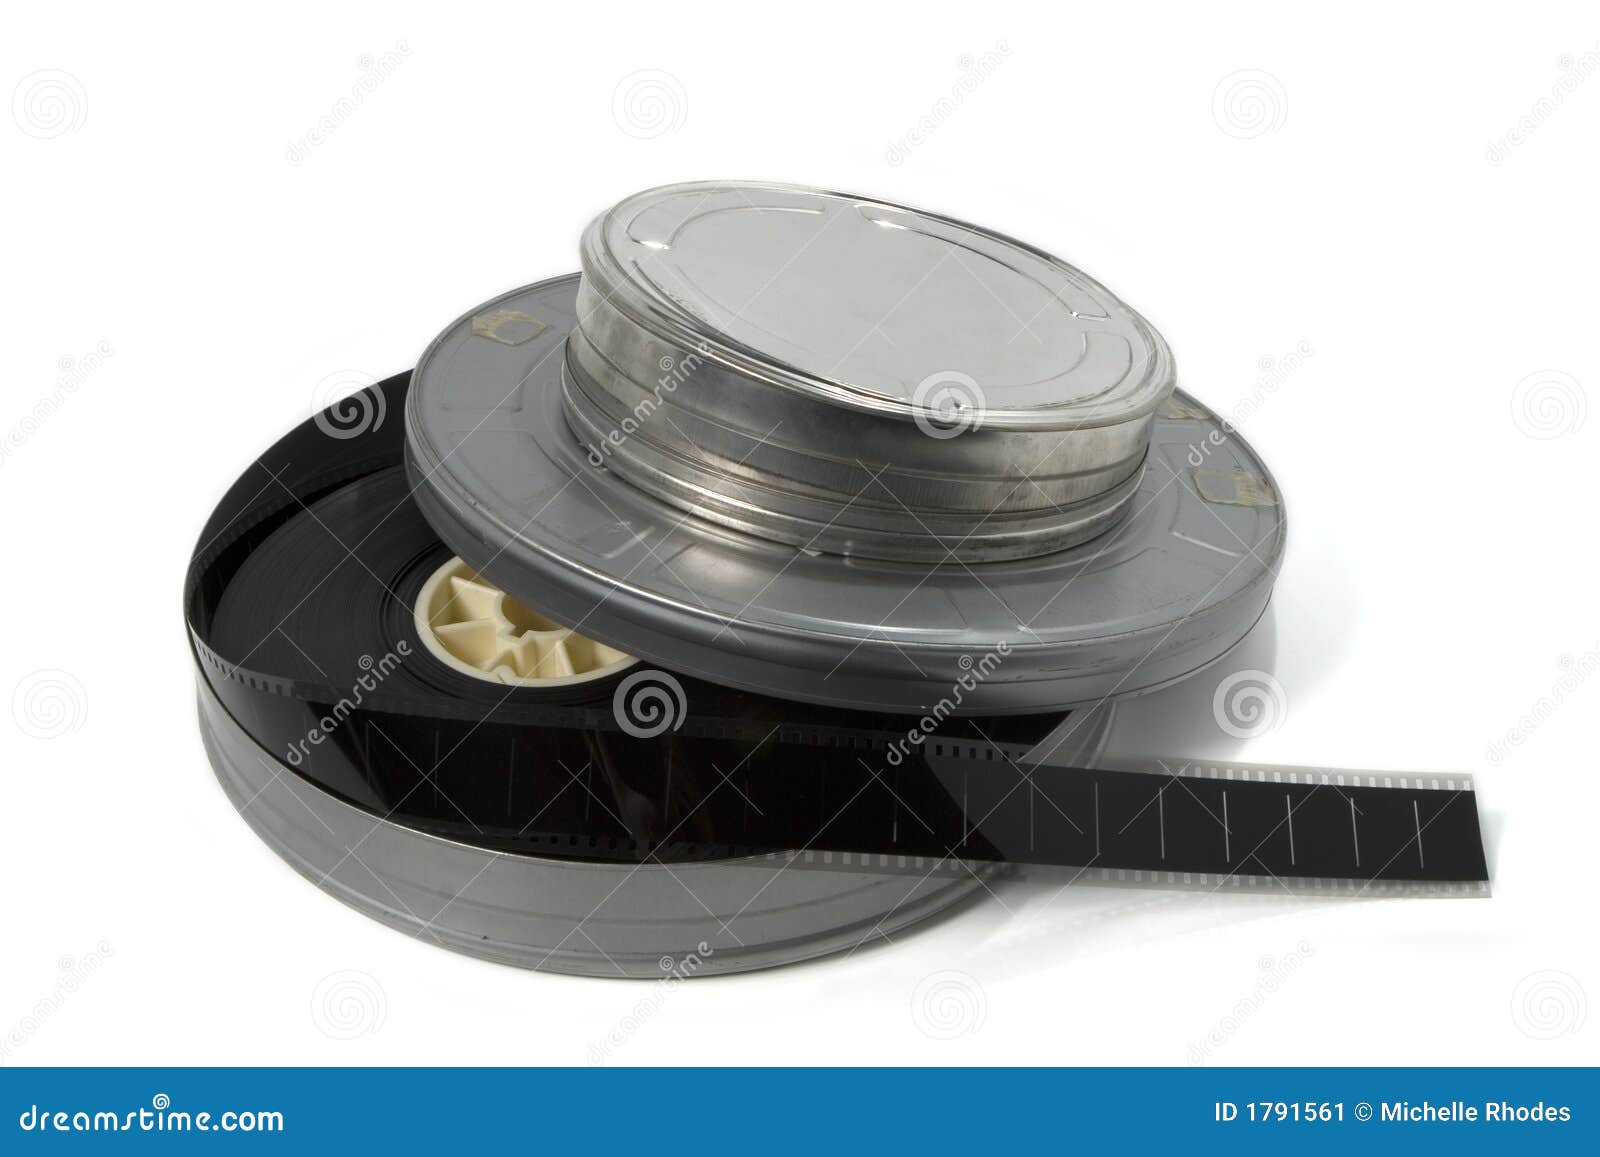 Movie Trailers in Metal Film Cans Stock Image - Image of curly,  projectionist: 1791561